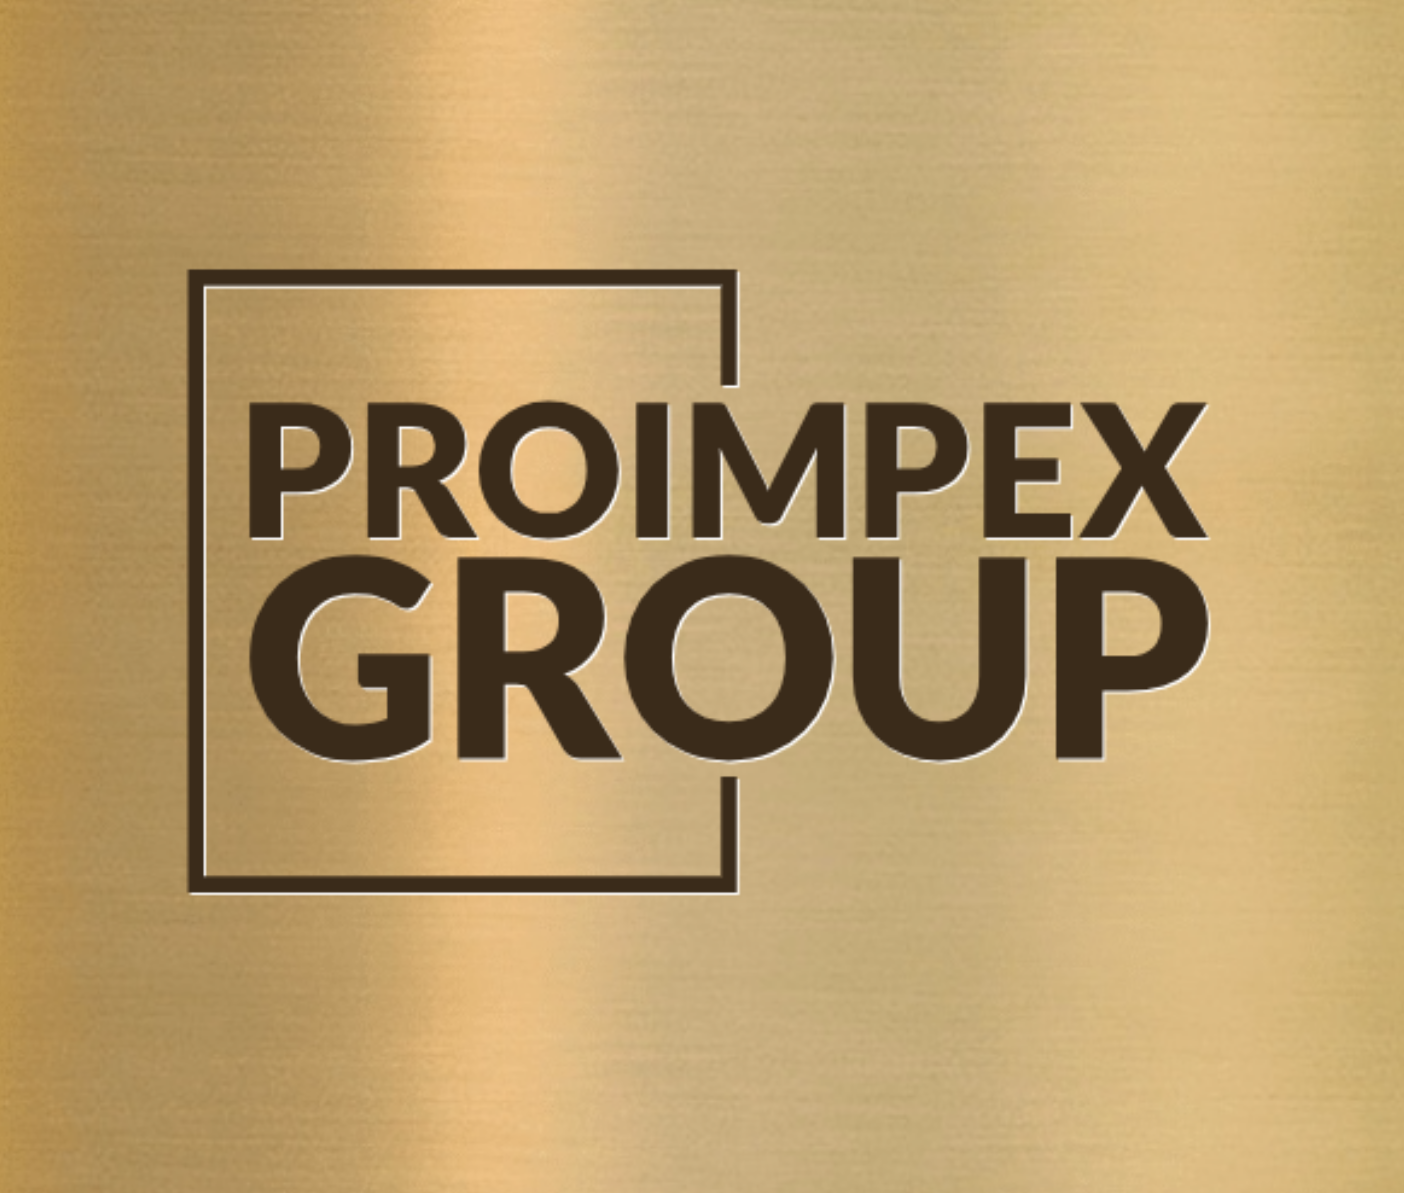 PRO-IMPEX GROUP